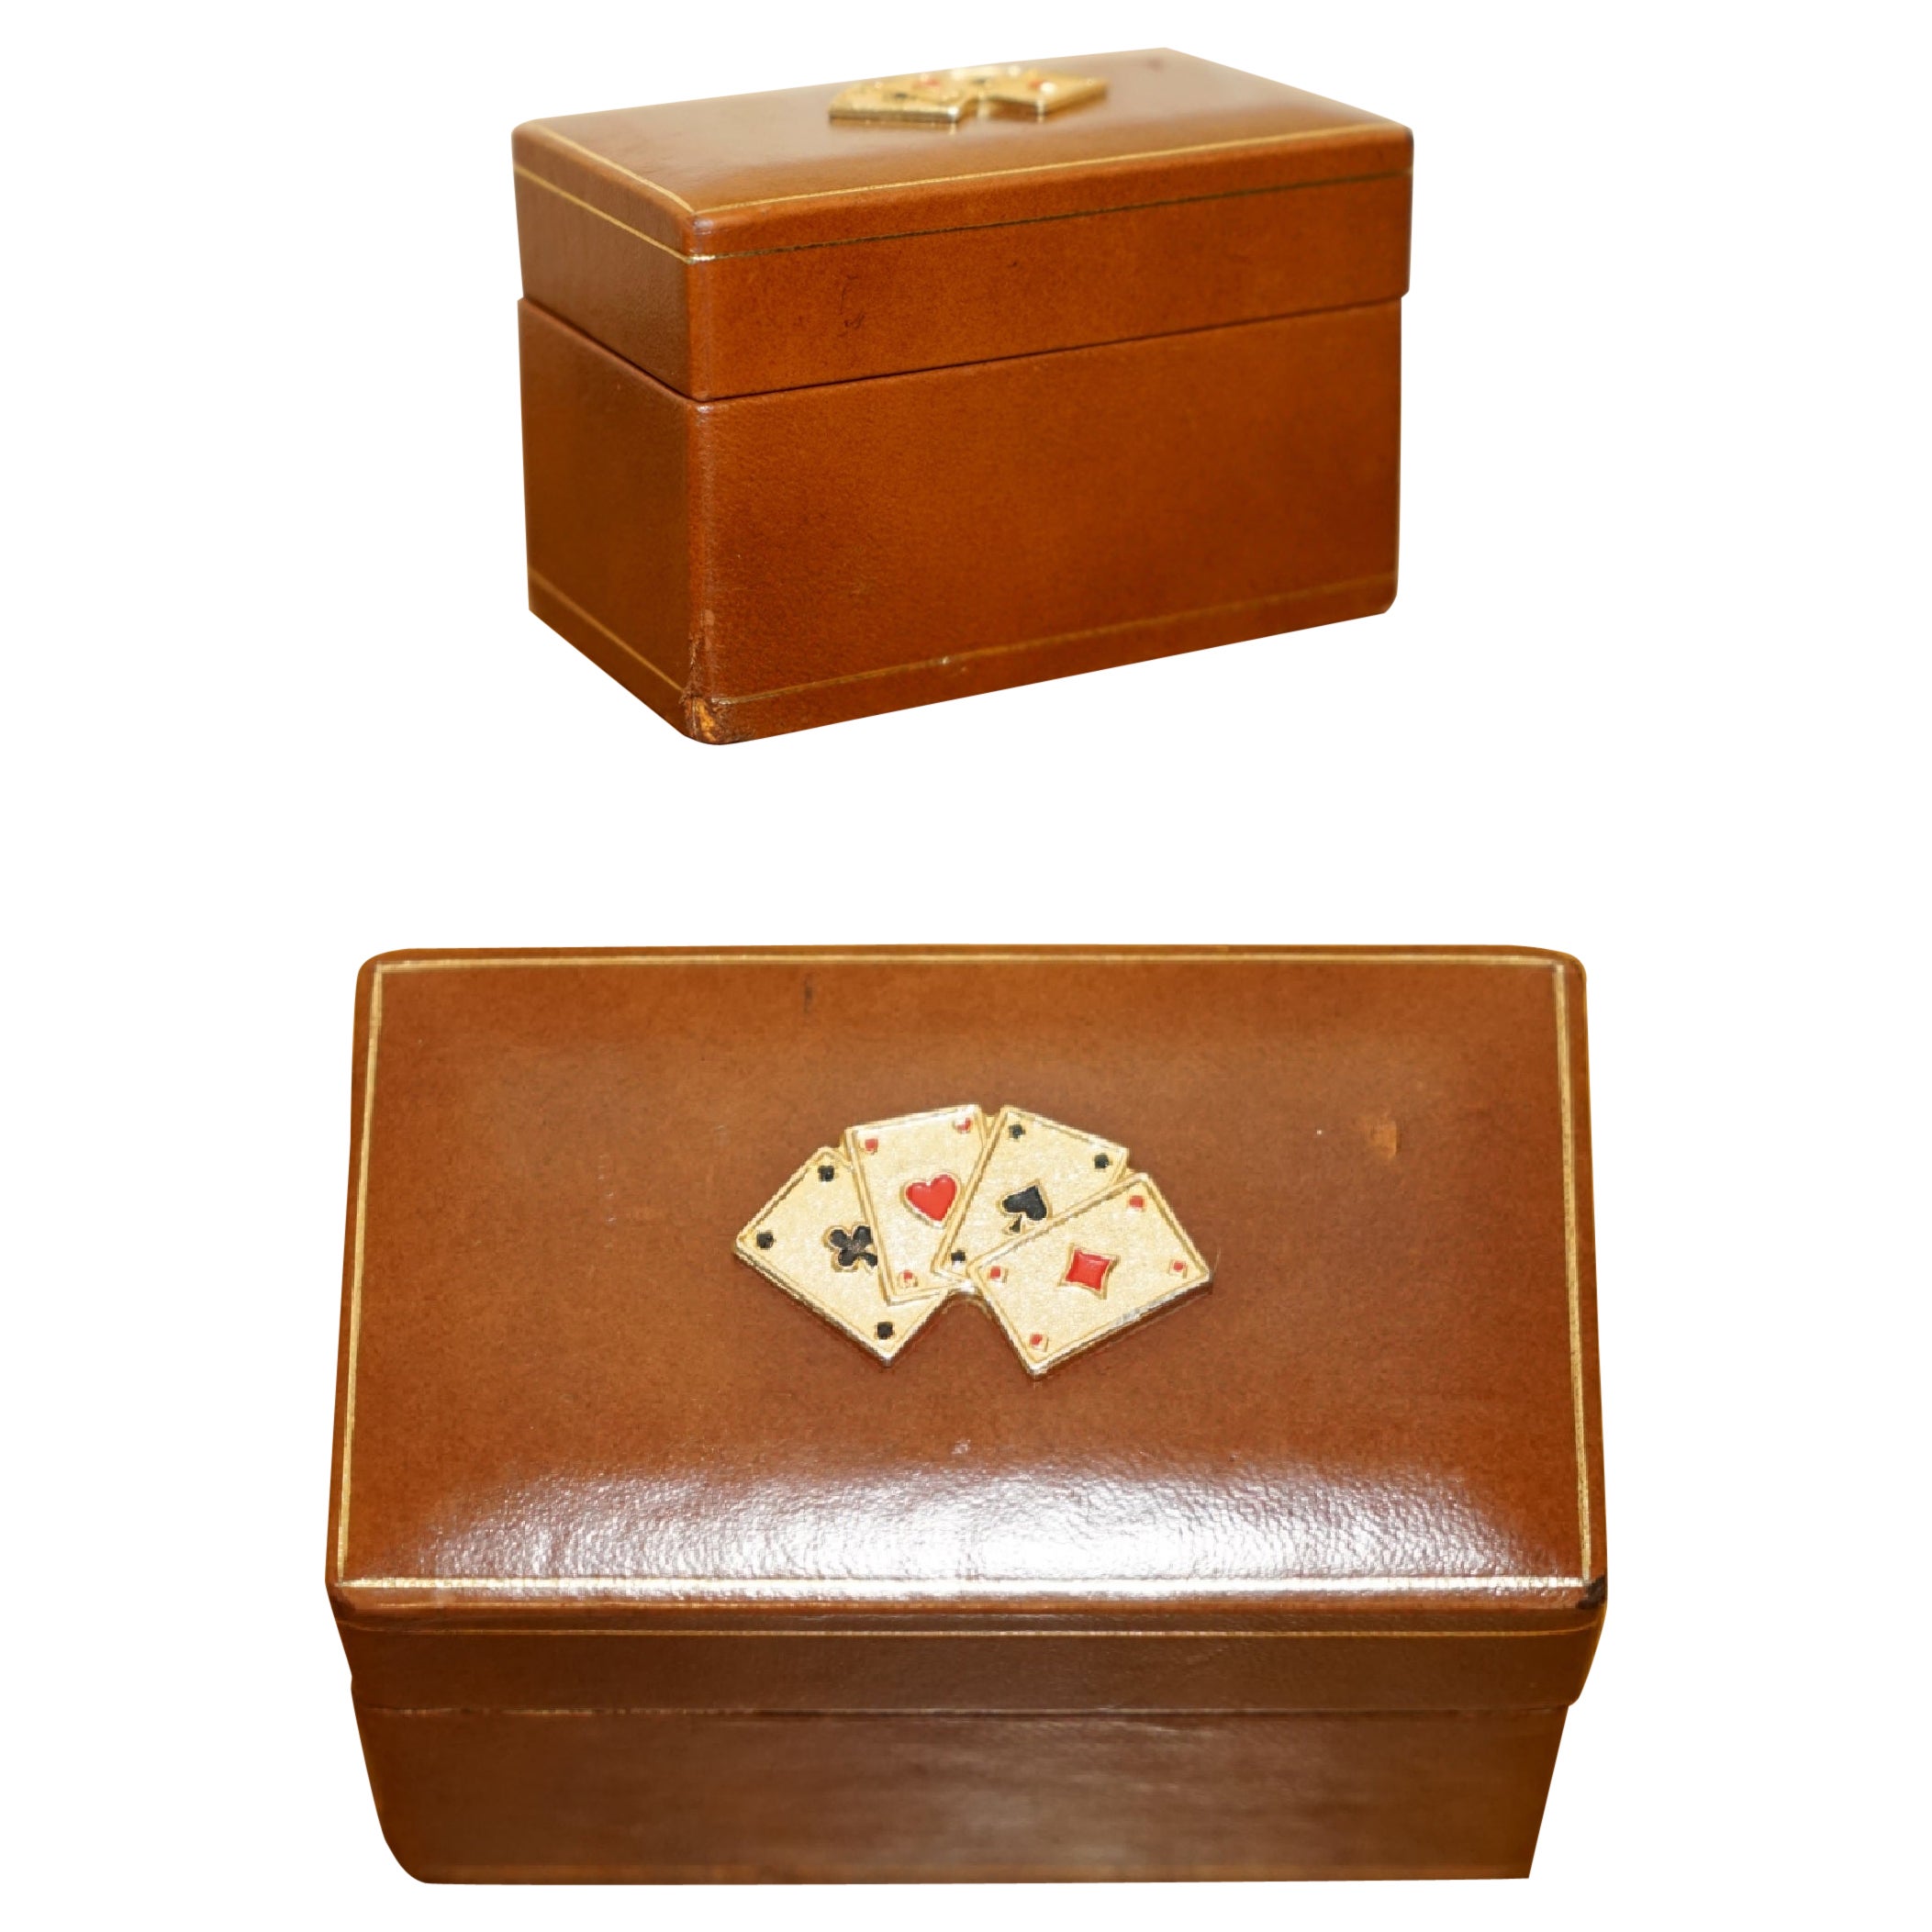 ANTIQUE CIRCA 1920 ART DECO LEATHER CLAD CASE PLAYiNG CARDS SET BRASS CARDS TOp For Sale